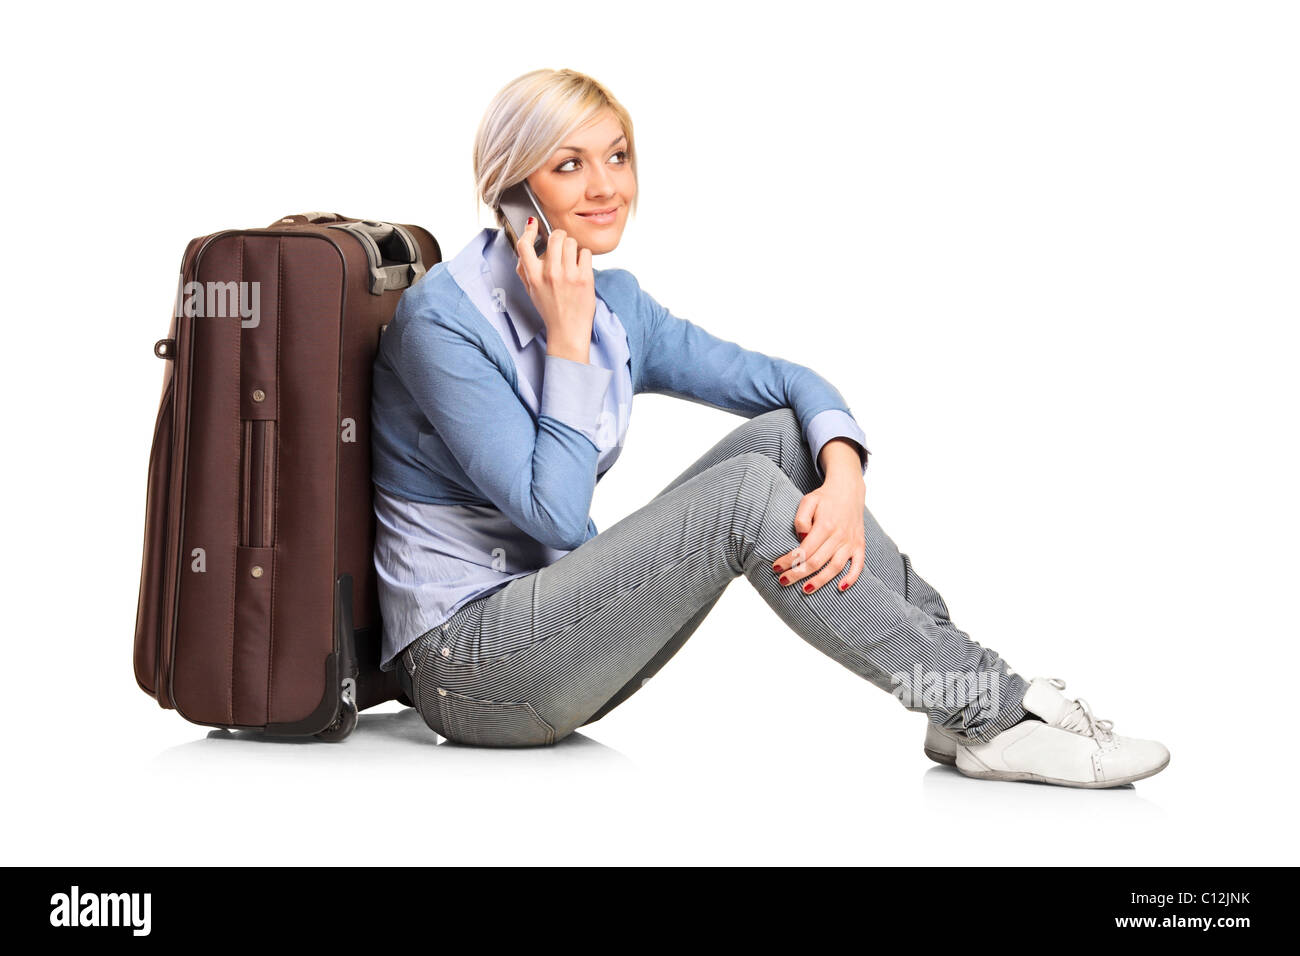 A tourist girl seated next to a suitcase talking on mobile phone Stock Photo